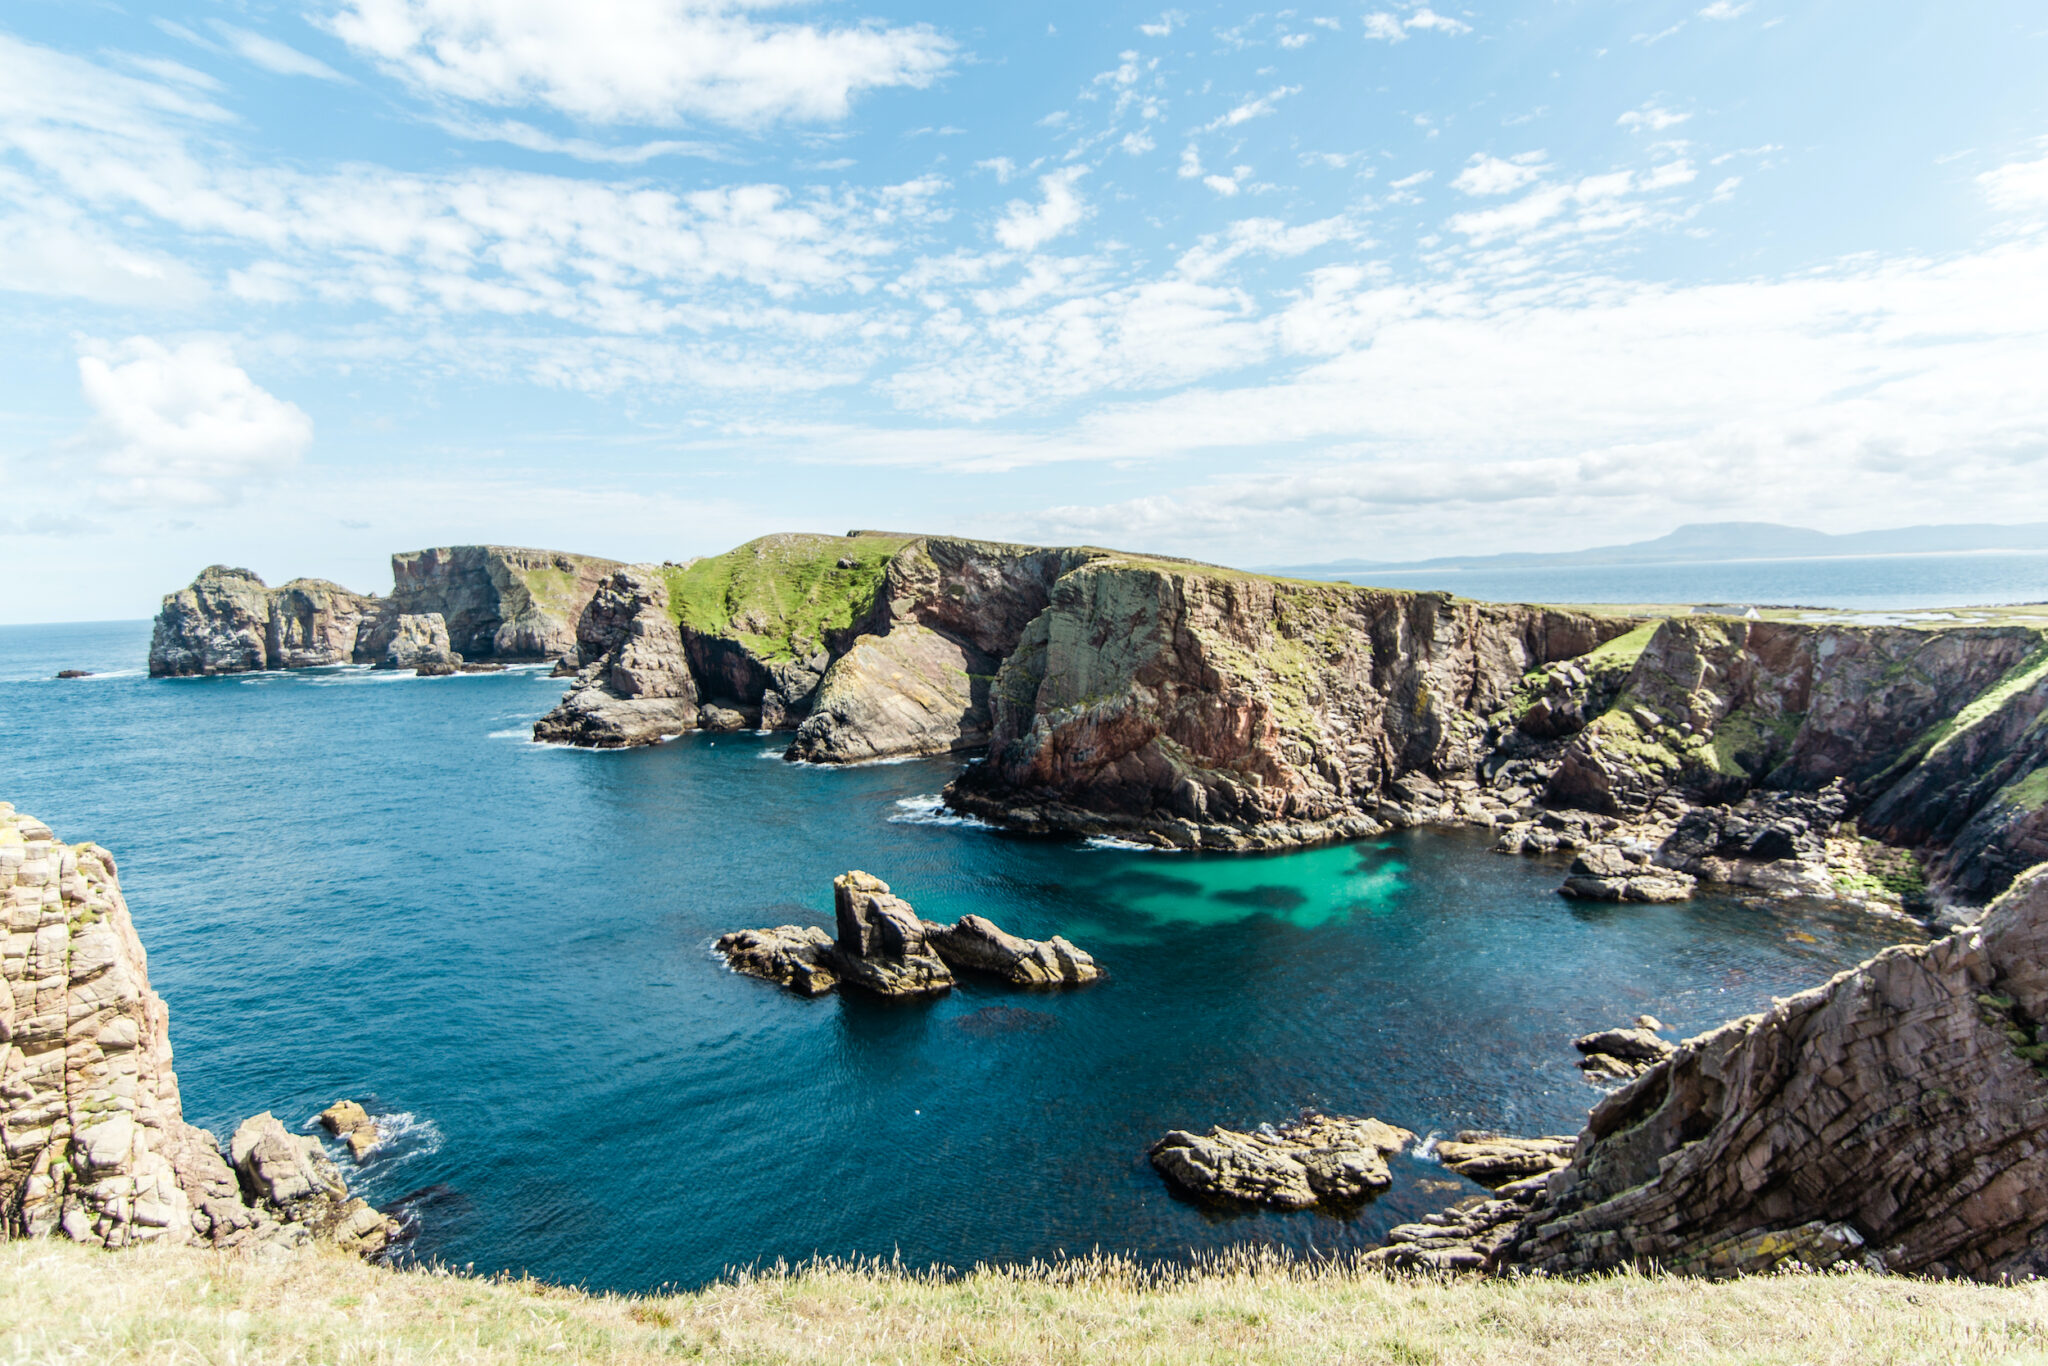 Tory Island, off the northern coast of the Emerald Isle, is one of the luckiest dive sites in Ireland.